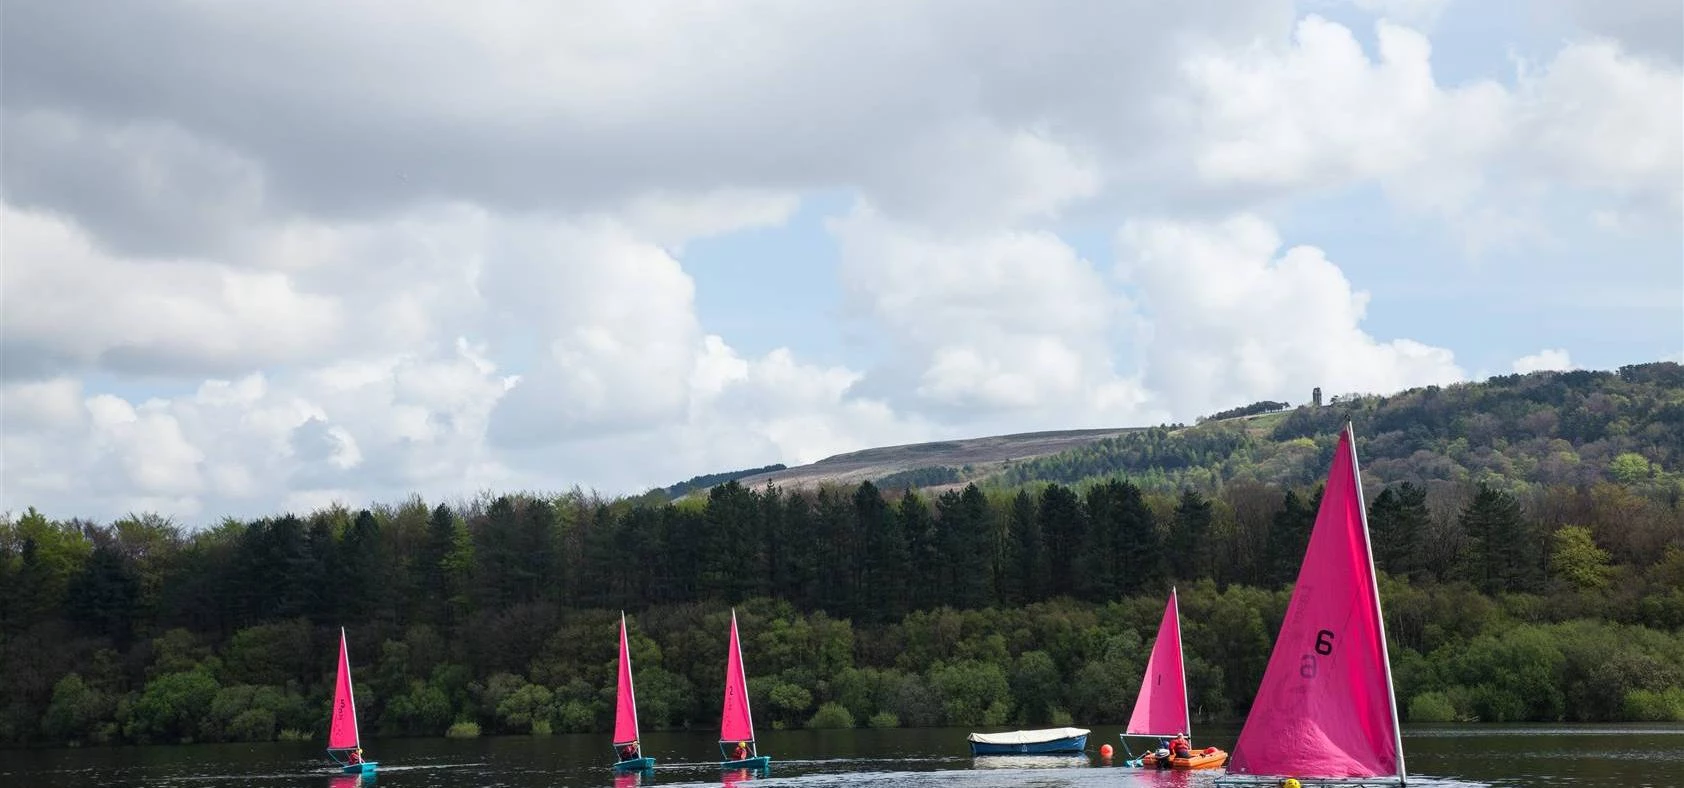 Sailing at The Anderton Centre in Rivington within easy reach of Manchester, Cheshire, Preston and B